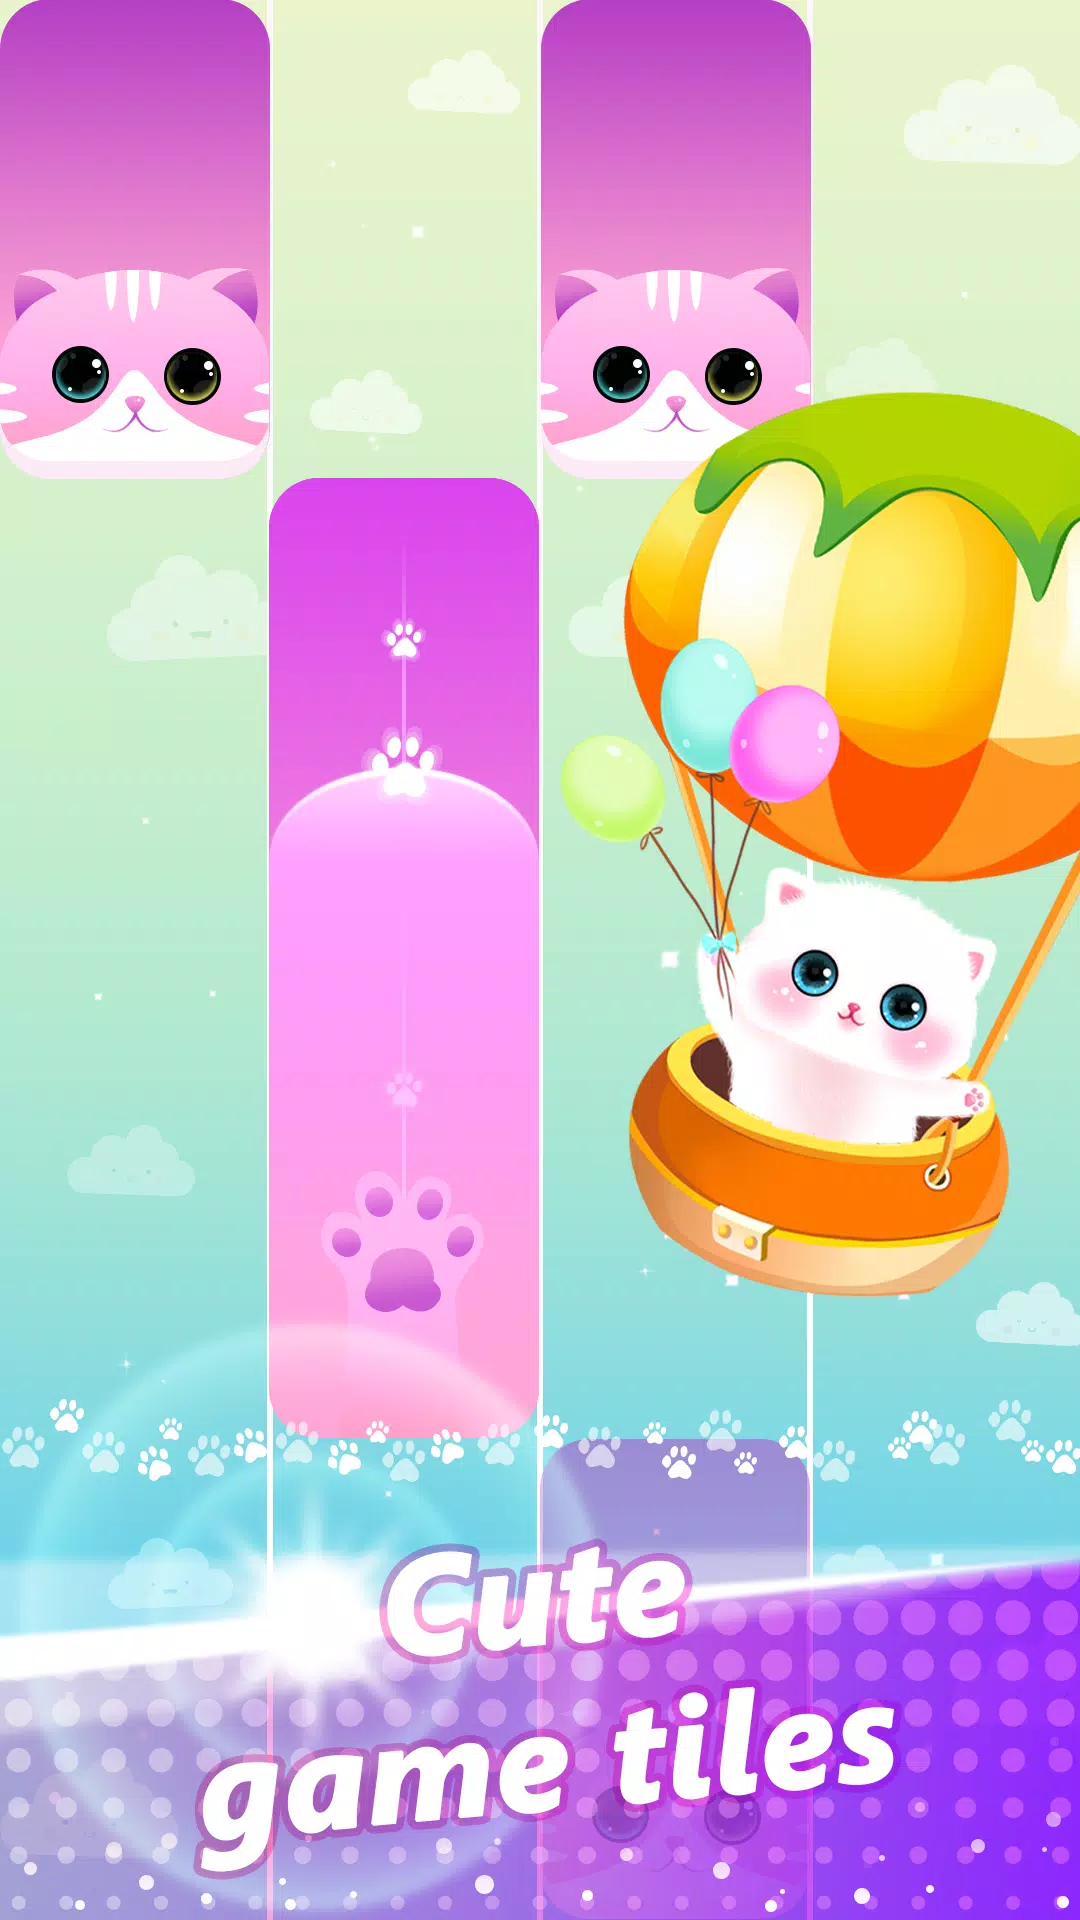 Magic Piano APK Download for Android Free